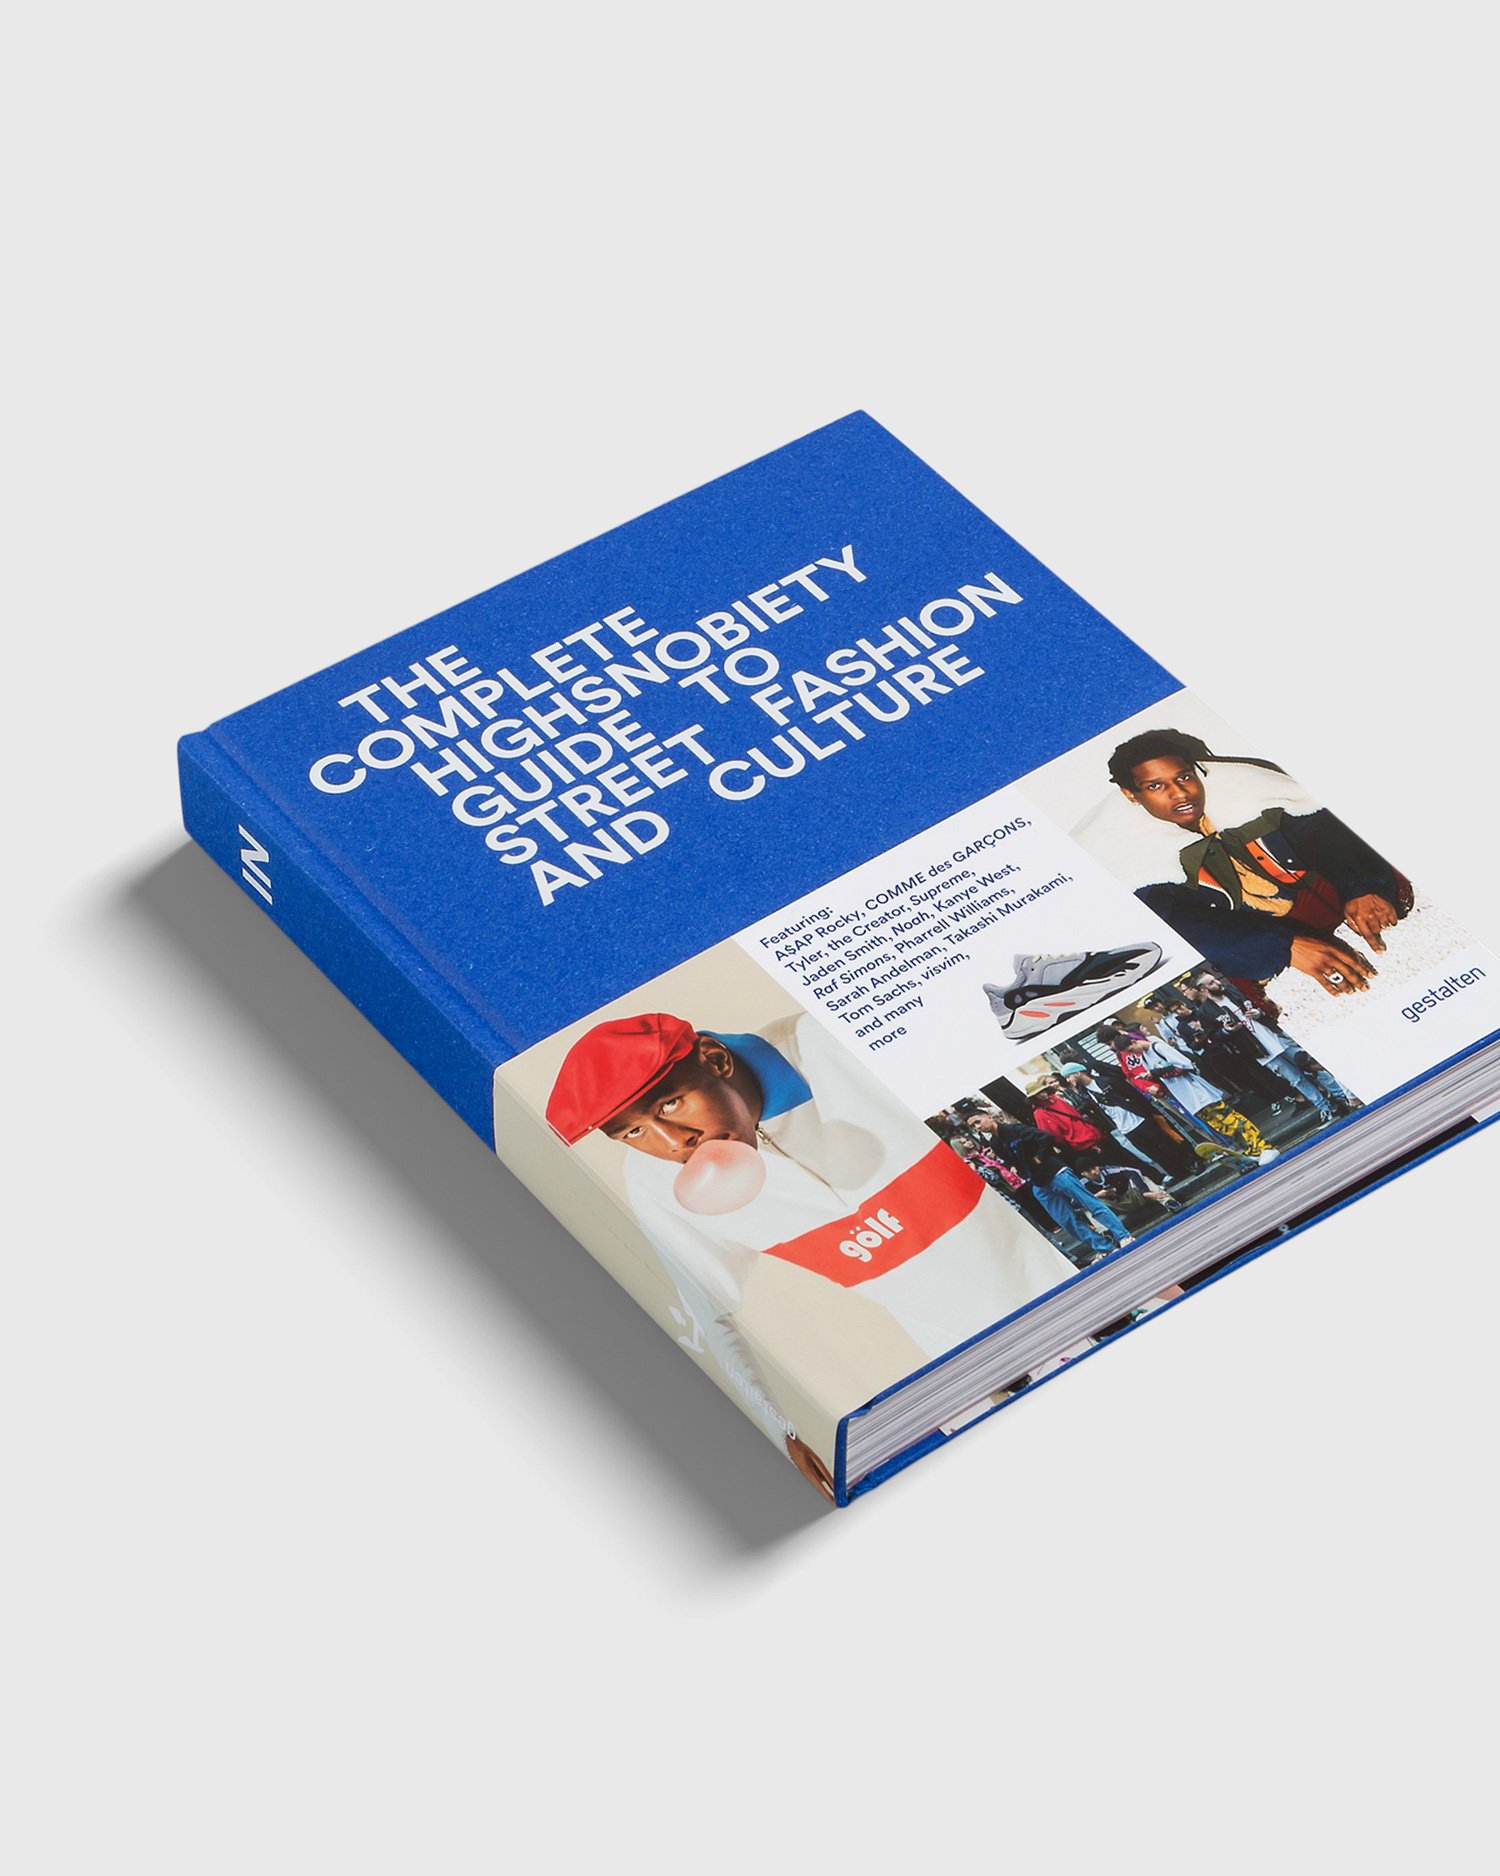 Highsnobiety - THE INCOMPLETE HIGHSNOBIETY GUIDE TO STREET FASHION AND CULTURE - Books - Blue - Image 1